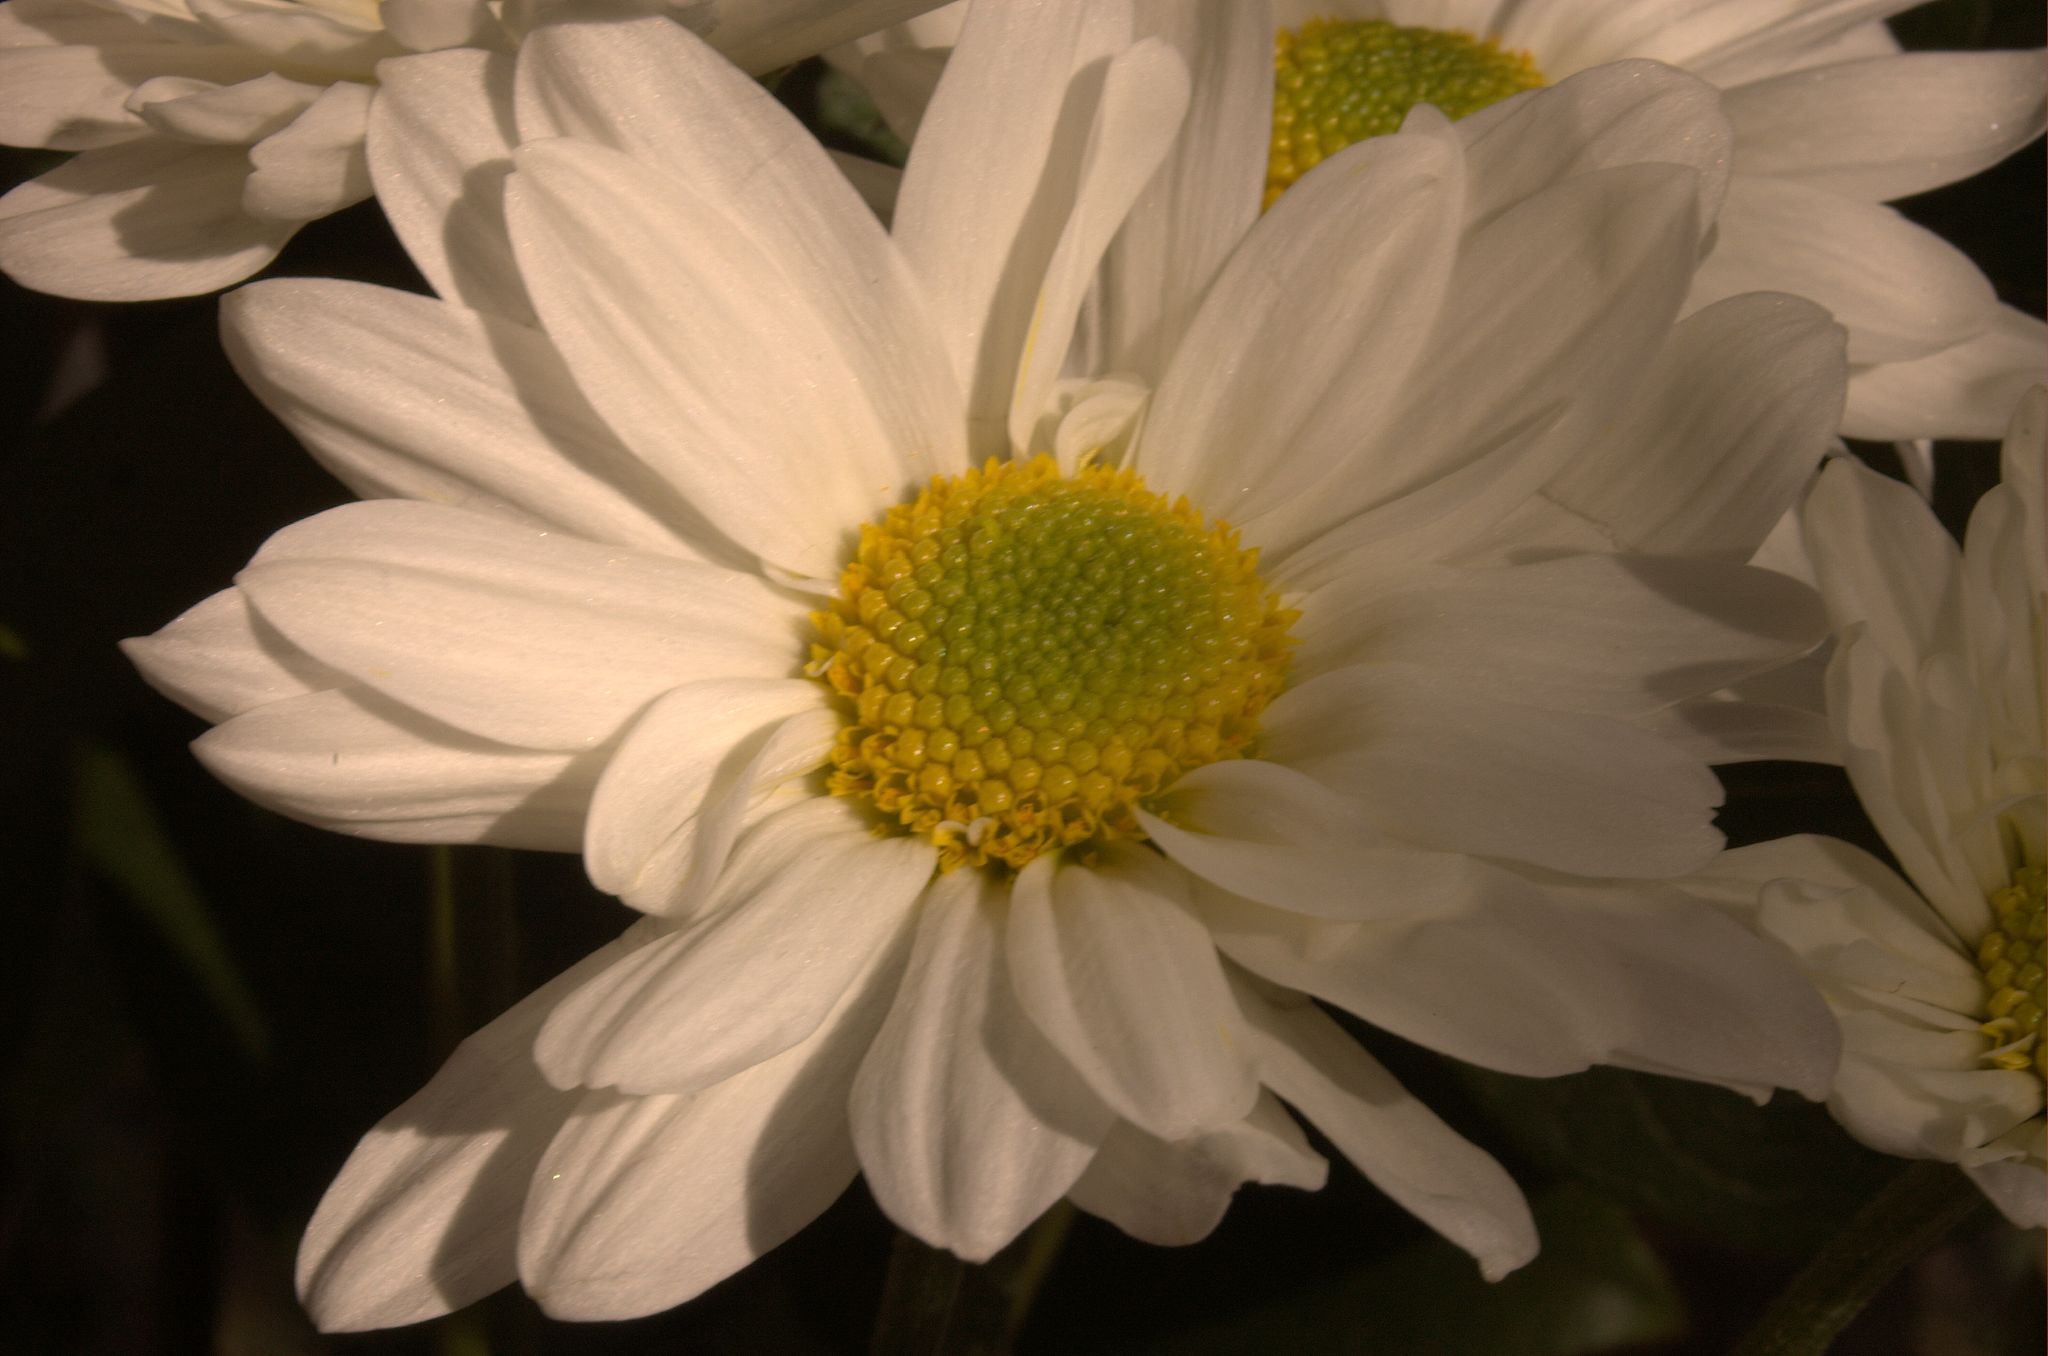 the flowers are bright white with a yellow center